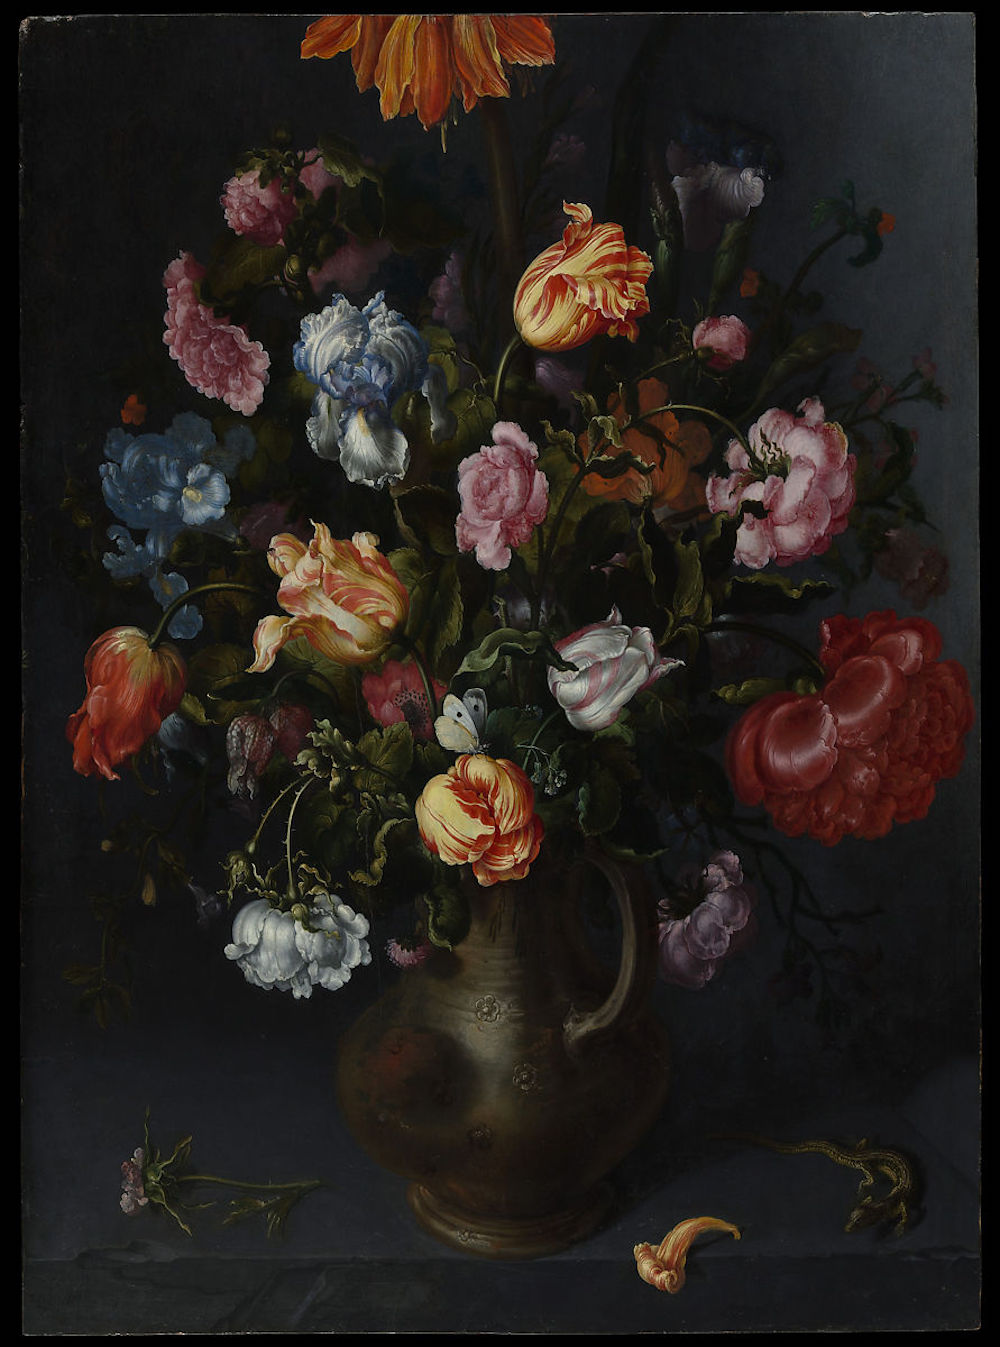 A Vase with Flowers Artist: Jacob Vosmaer (Dutch, Delft ca. 1584–1641 Delft) Date: probably 1613 Medium: Oil on wood Dimensions: 33 1/2 x 24 5/8 in. (85.1 x 62.5 cm) Classification: Paintings Credit Line: Purchase, 1871